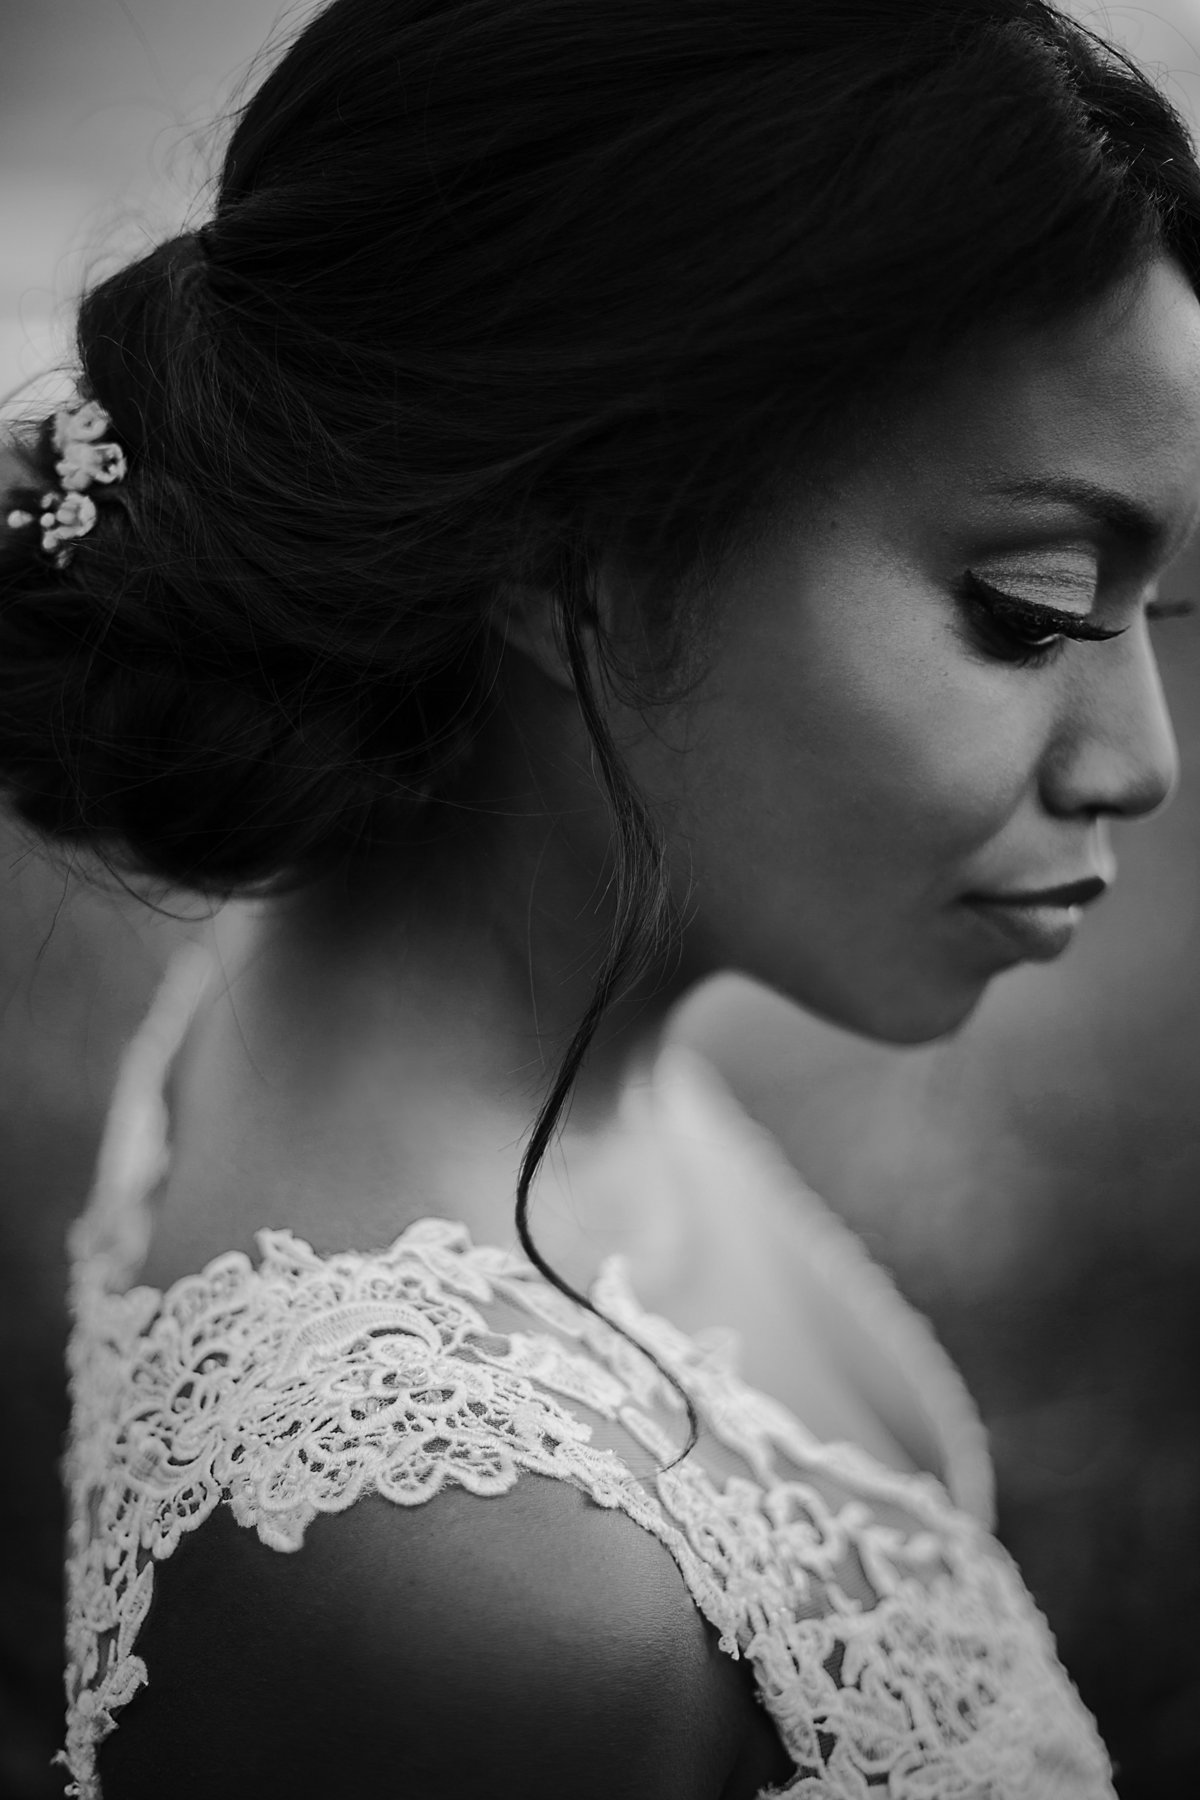 Charlotte wedding photographer Jamie Lucido creates a timeless black and white portrait of a bride